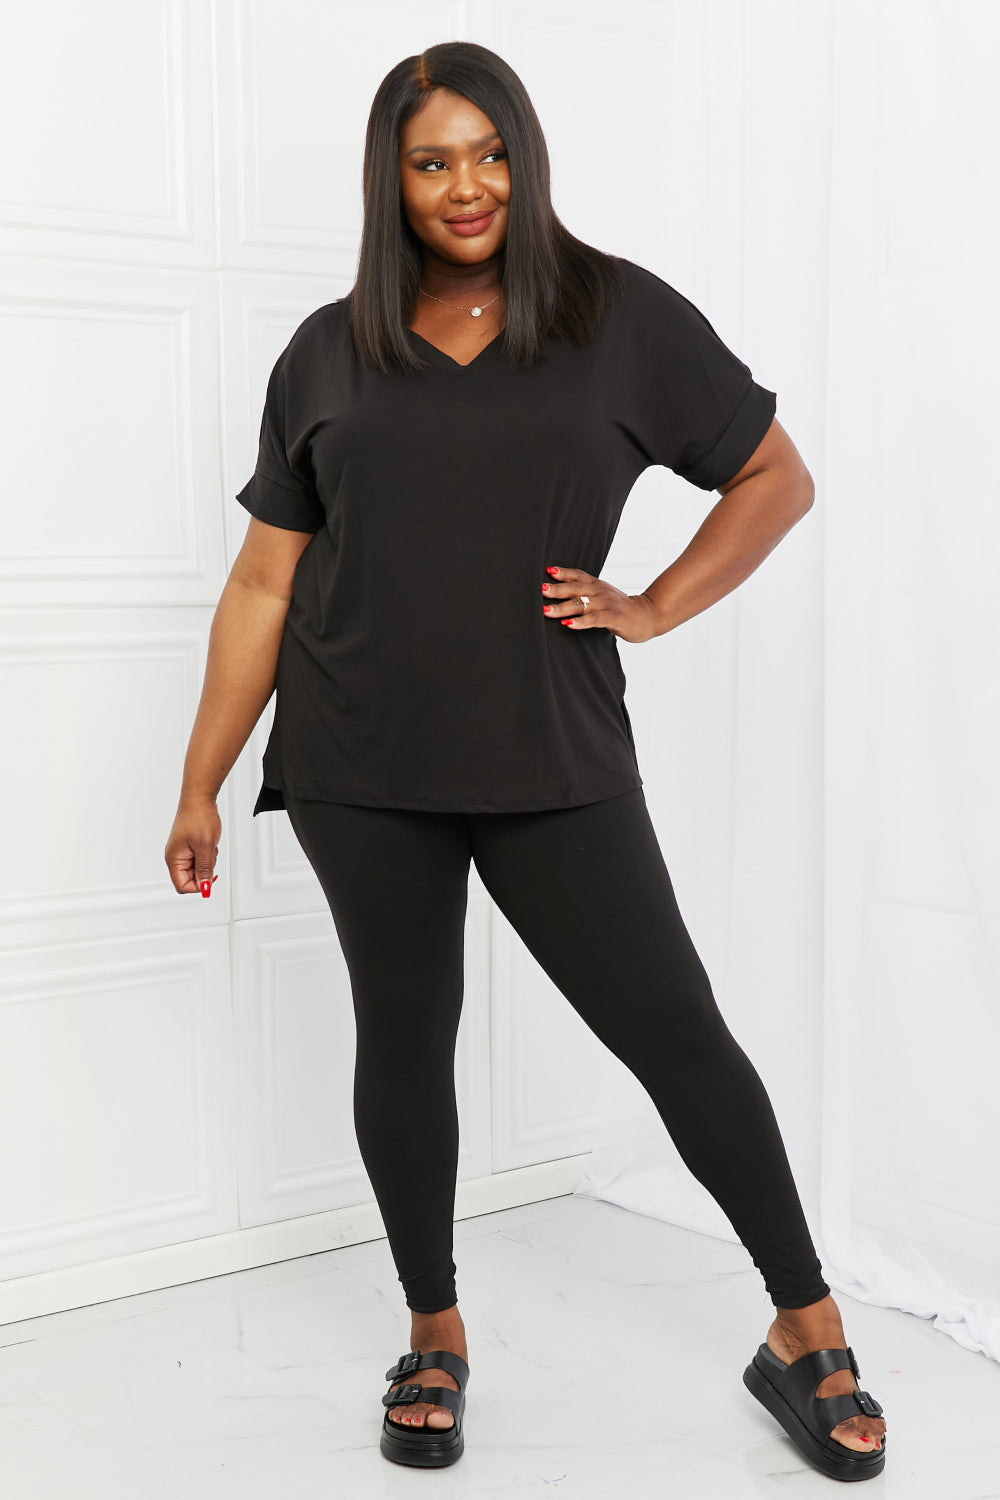 Self Love Full Size Brushed DTY Microfiber Lounge Set in Black - Women’s Clothing & Accessories - Shirts & Tops - 3